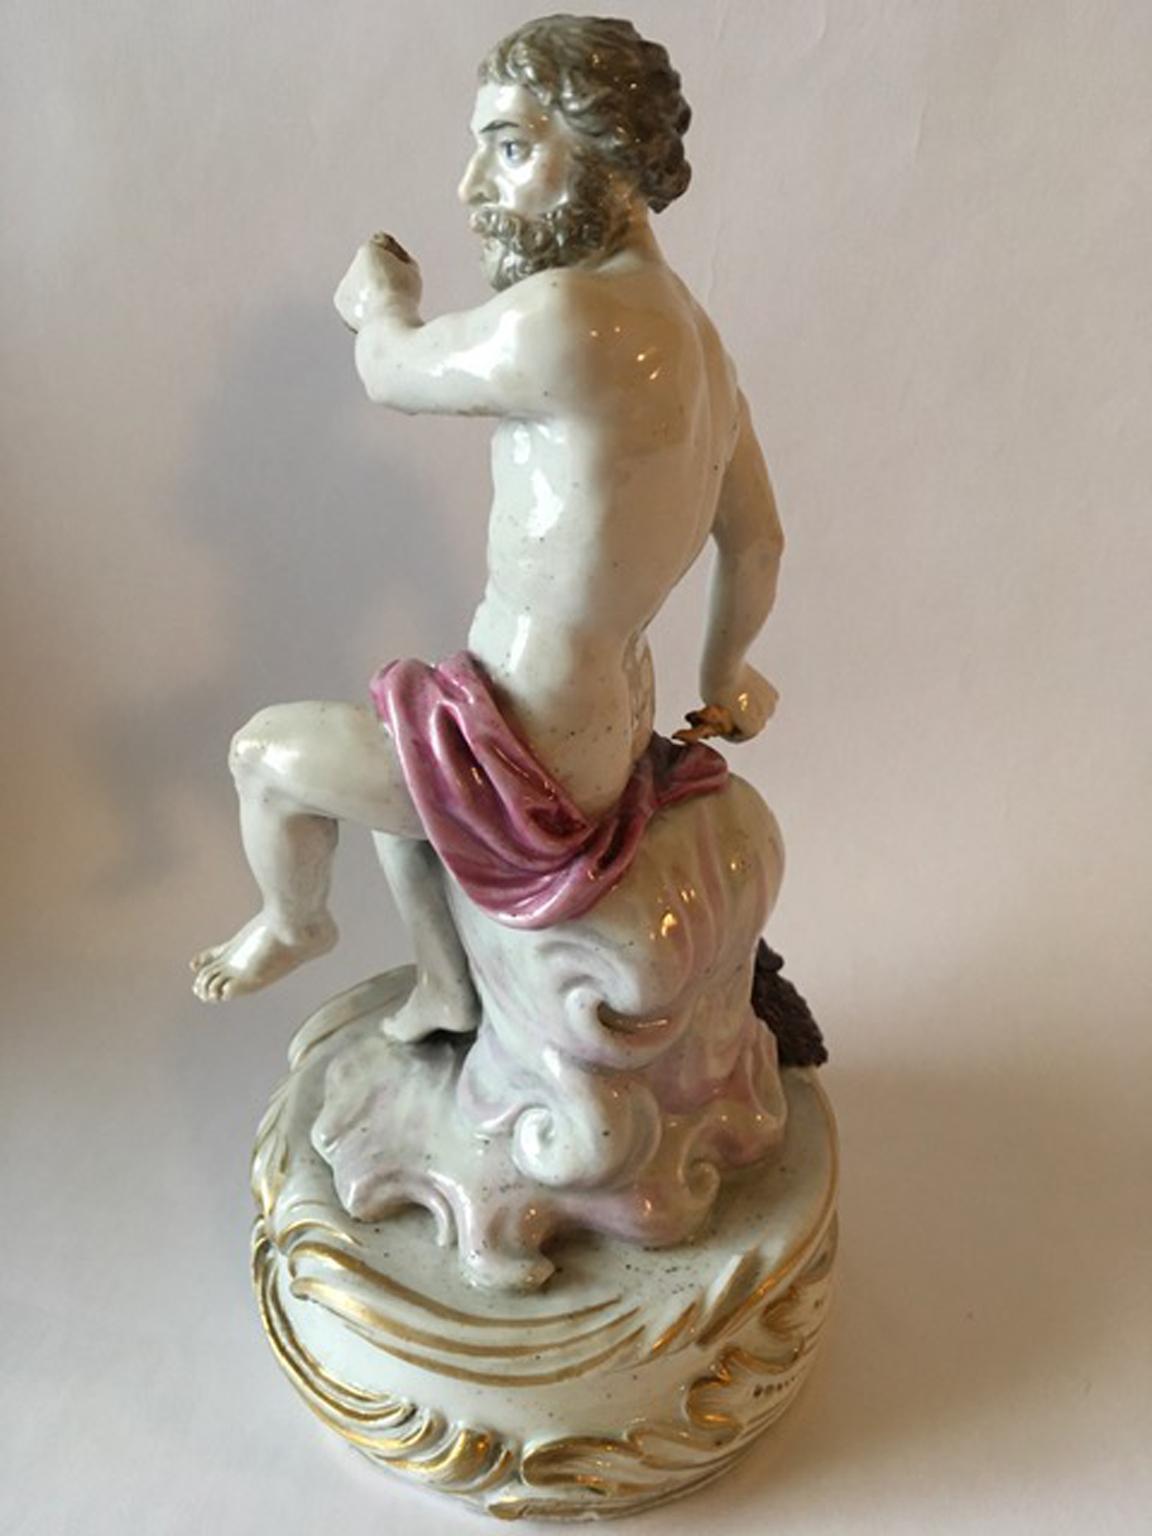 German Europe 18th Century Attribuited to Meissen Porcelain Giove Figurine For Sale